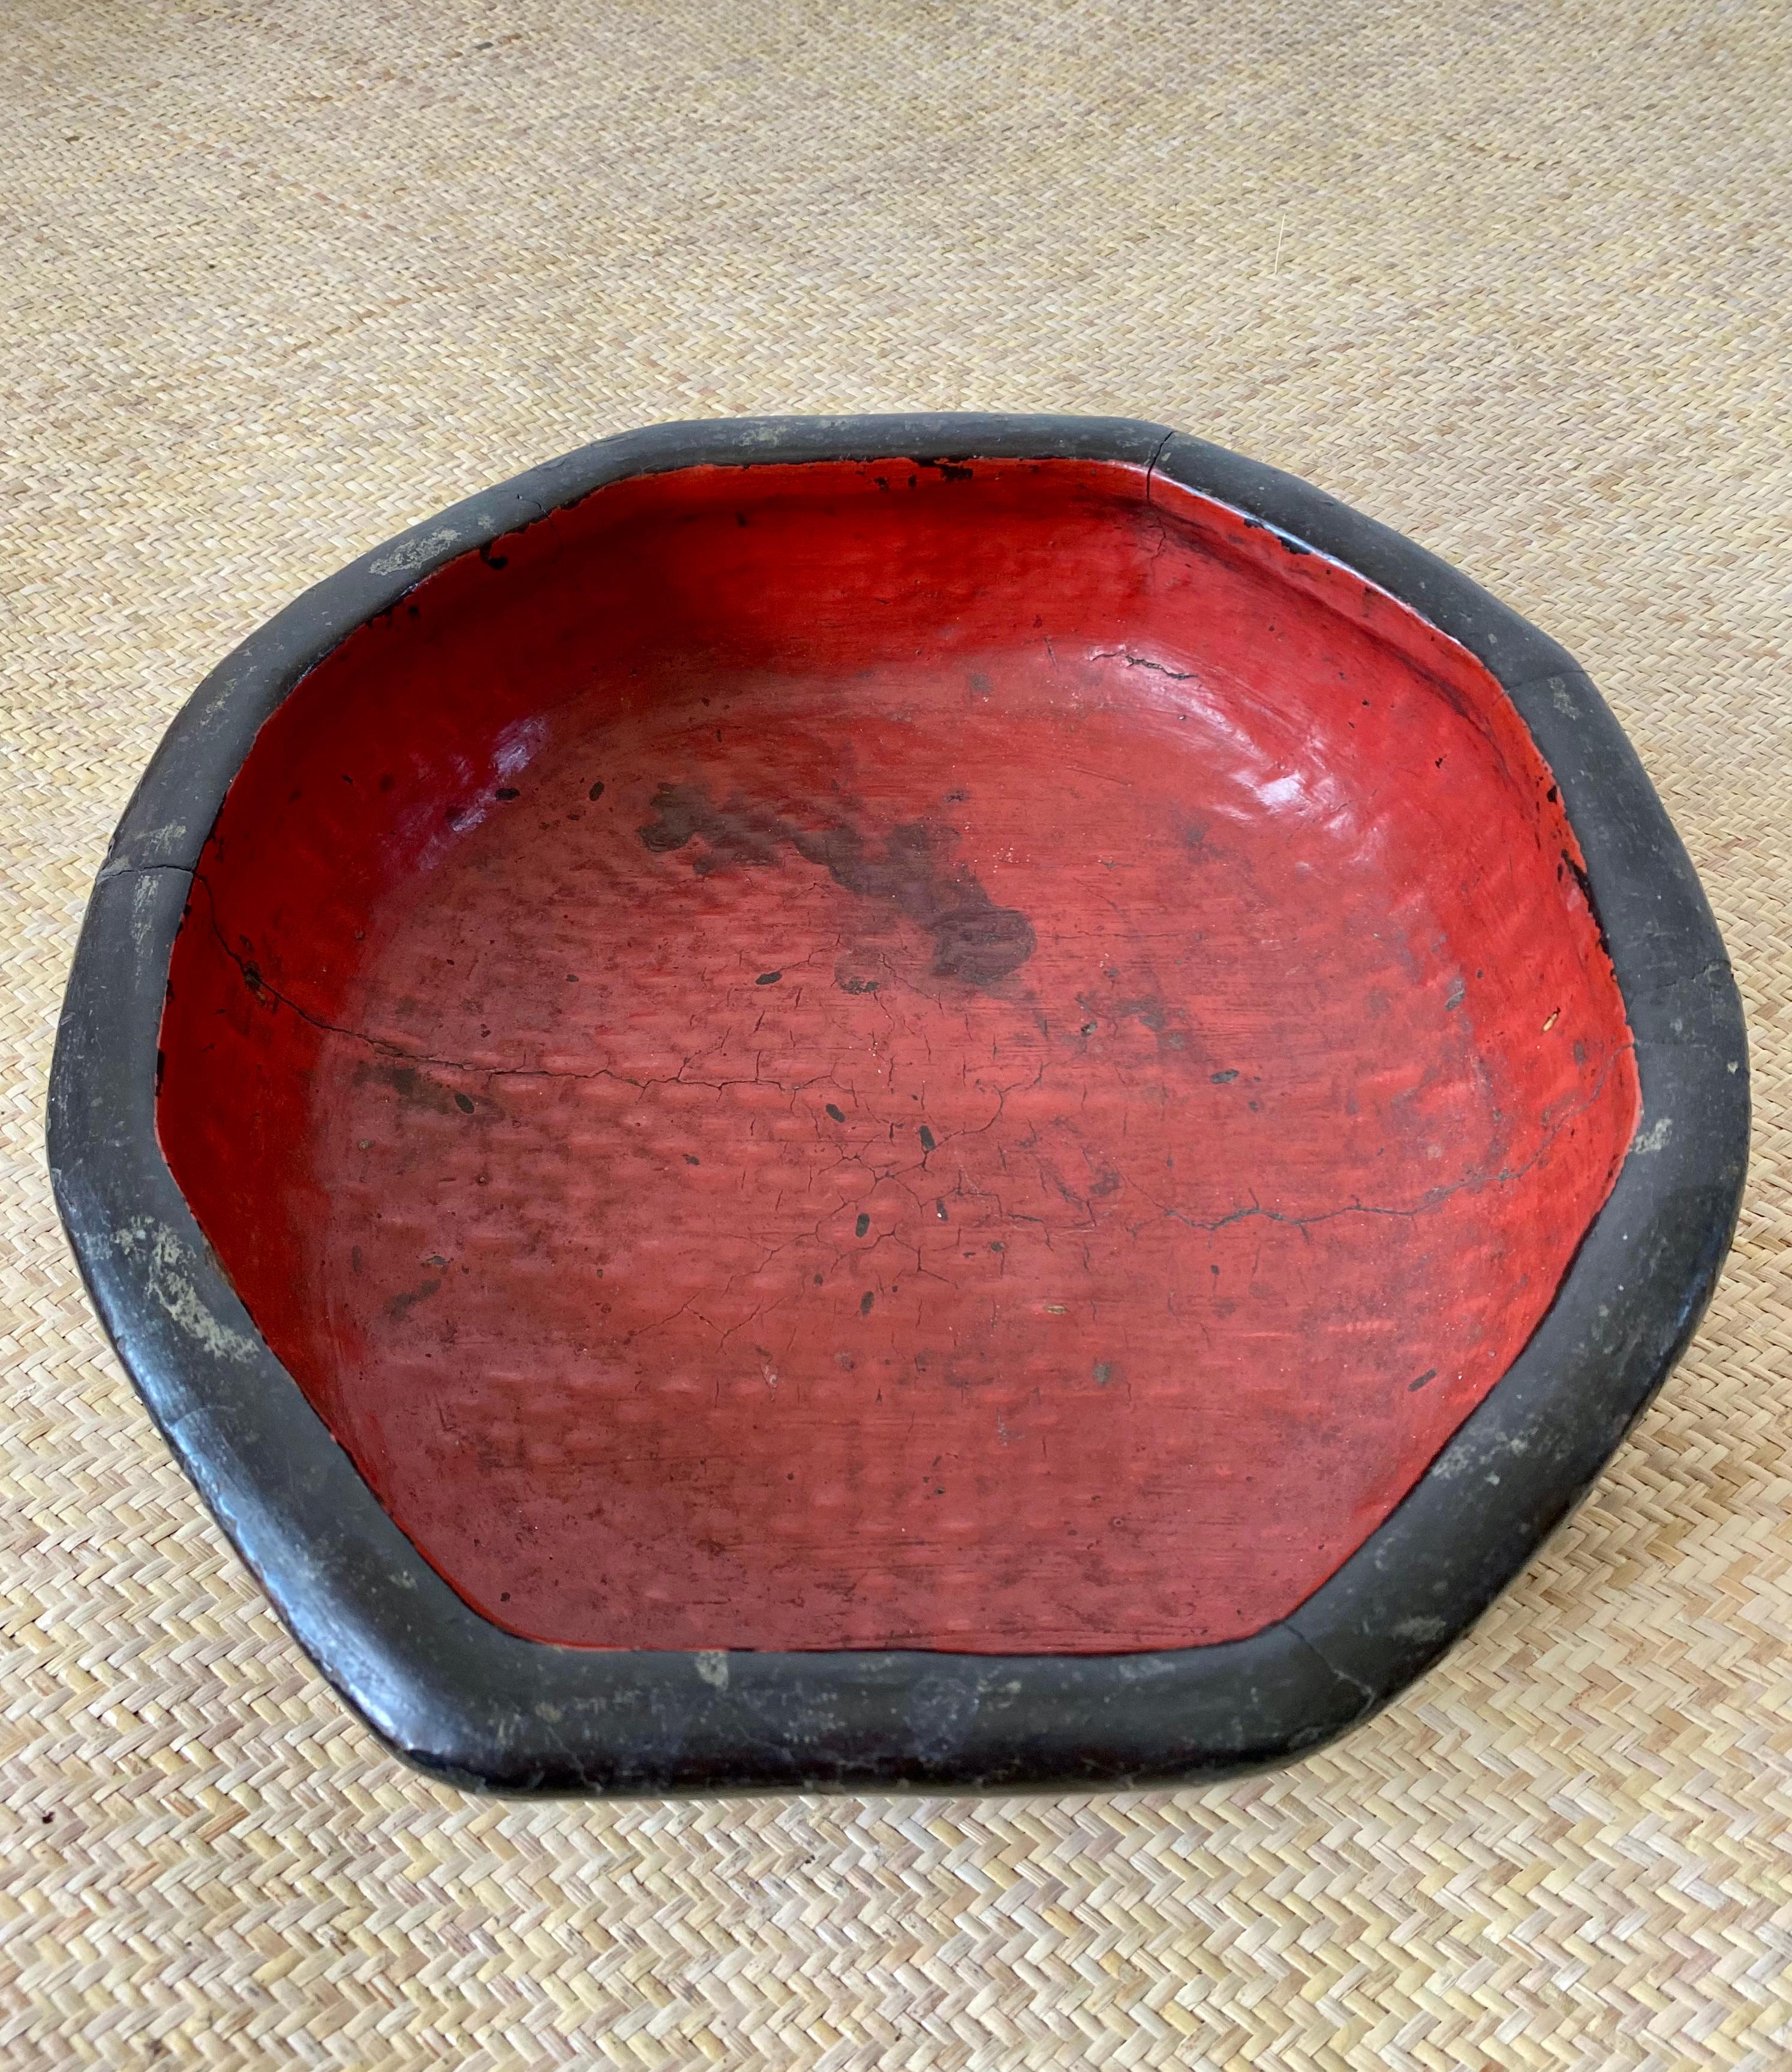 A Japanese red & black lacquer bowl from the early 20th century. Its frame is crafted from woven rattan fibres and covered in multiple layers of lacquer. The bowl has aged beautifully over the years with small cracks and fading of the original